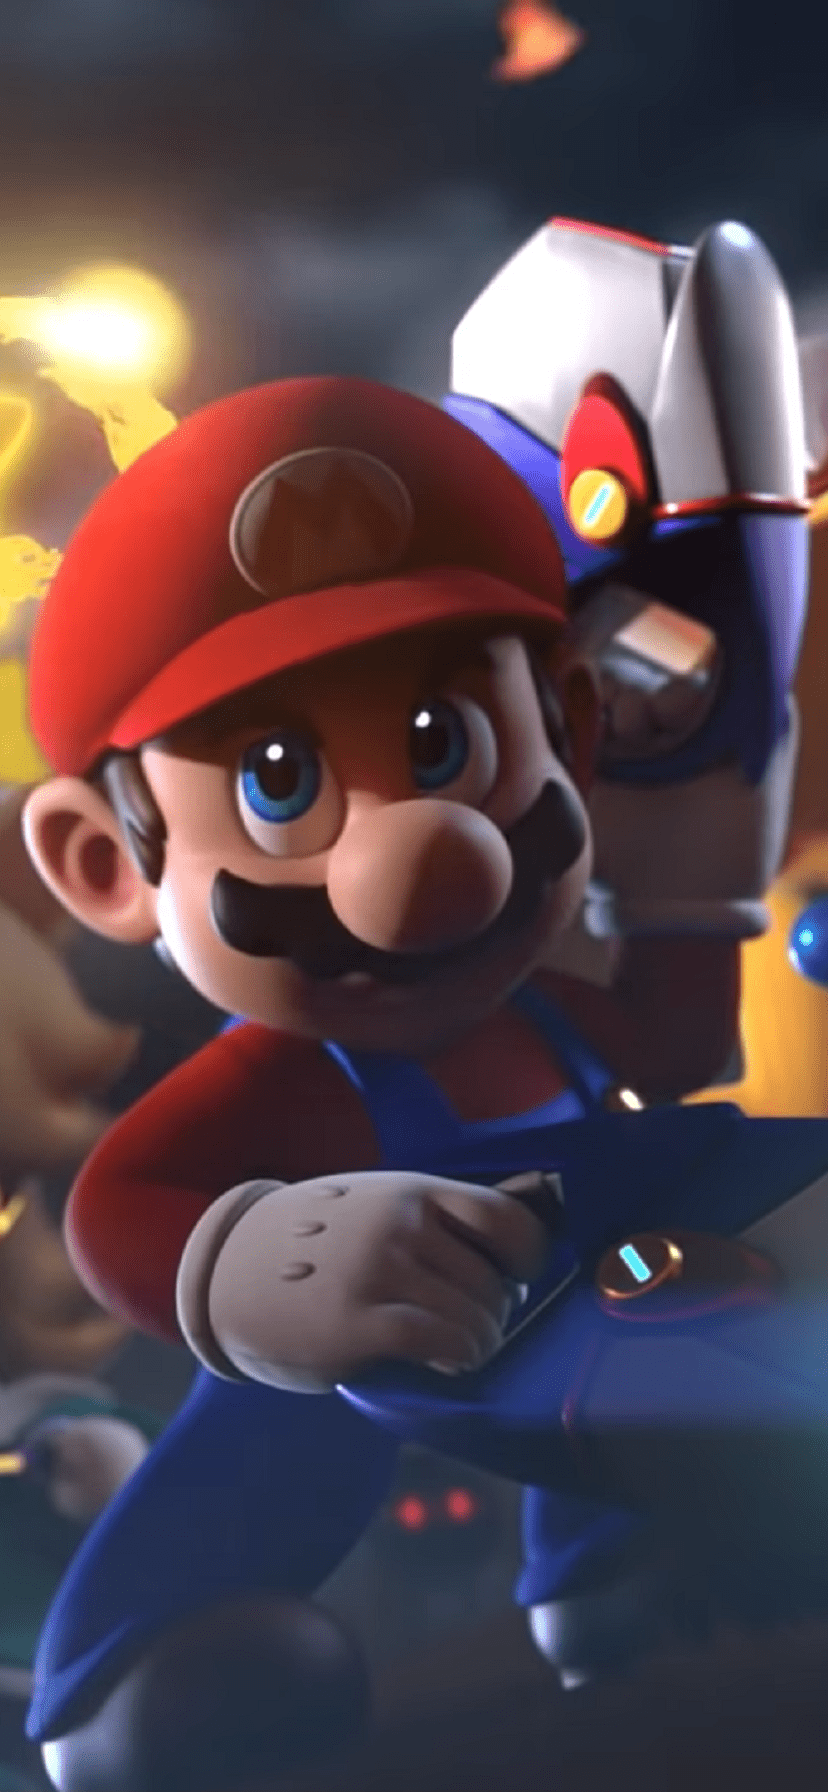 Super Mario Bros movie teaser trailer will be released soon